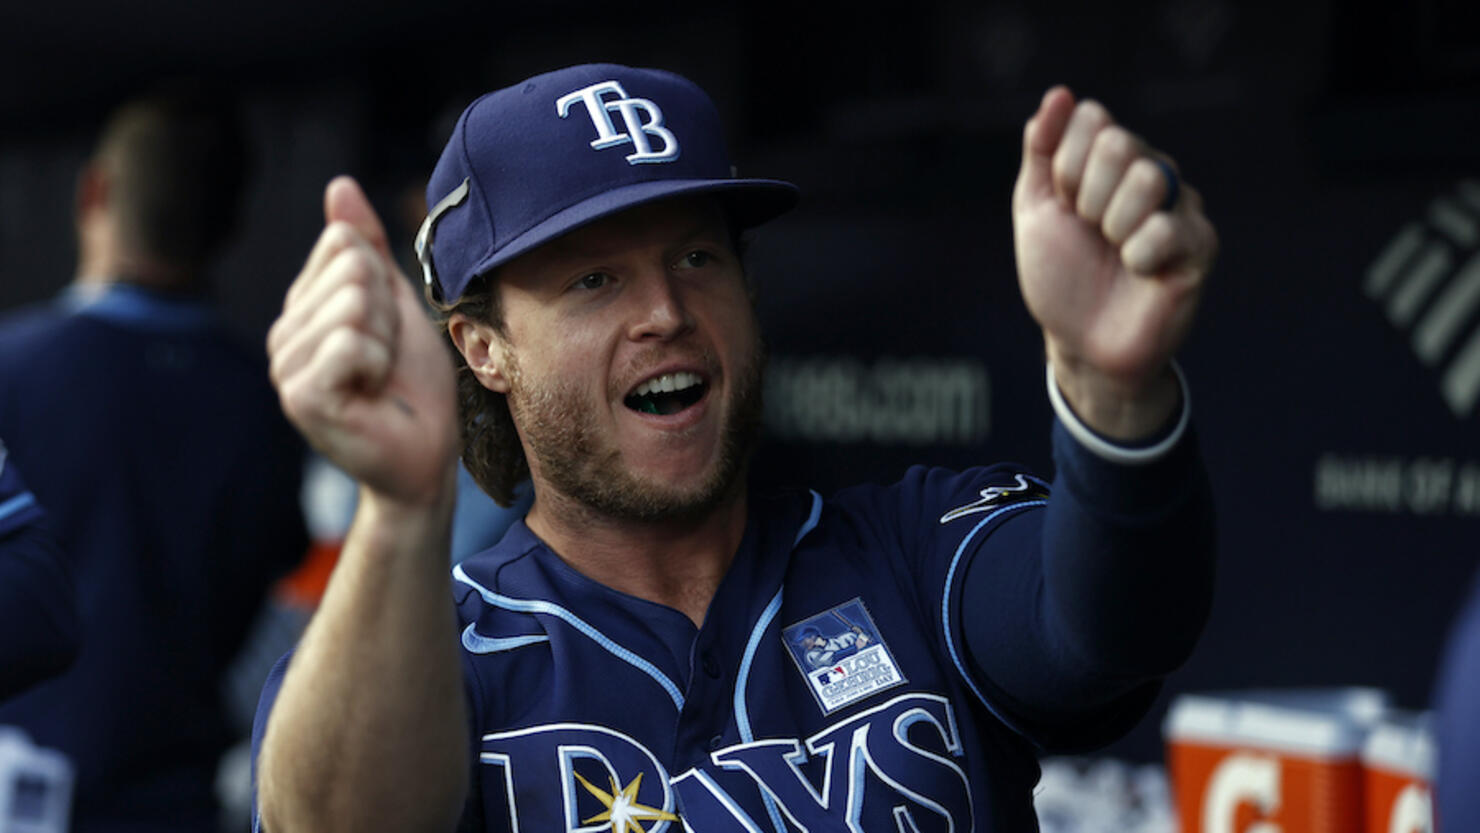 WATCH: Rays Outfielder Makes Hilarious Emergency Pitching Appearance